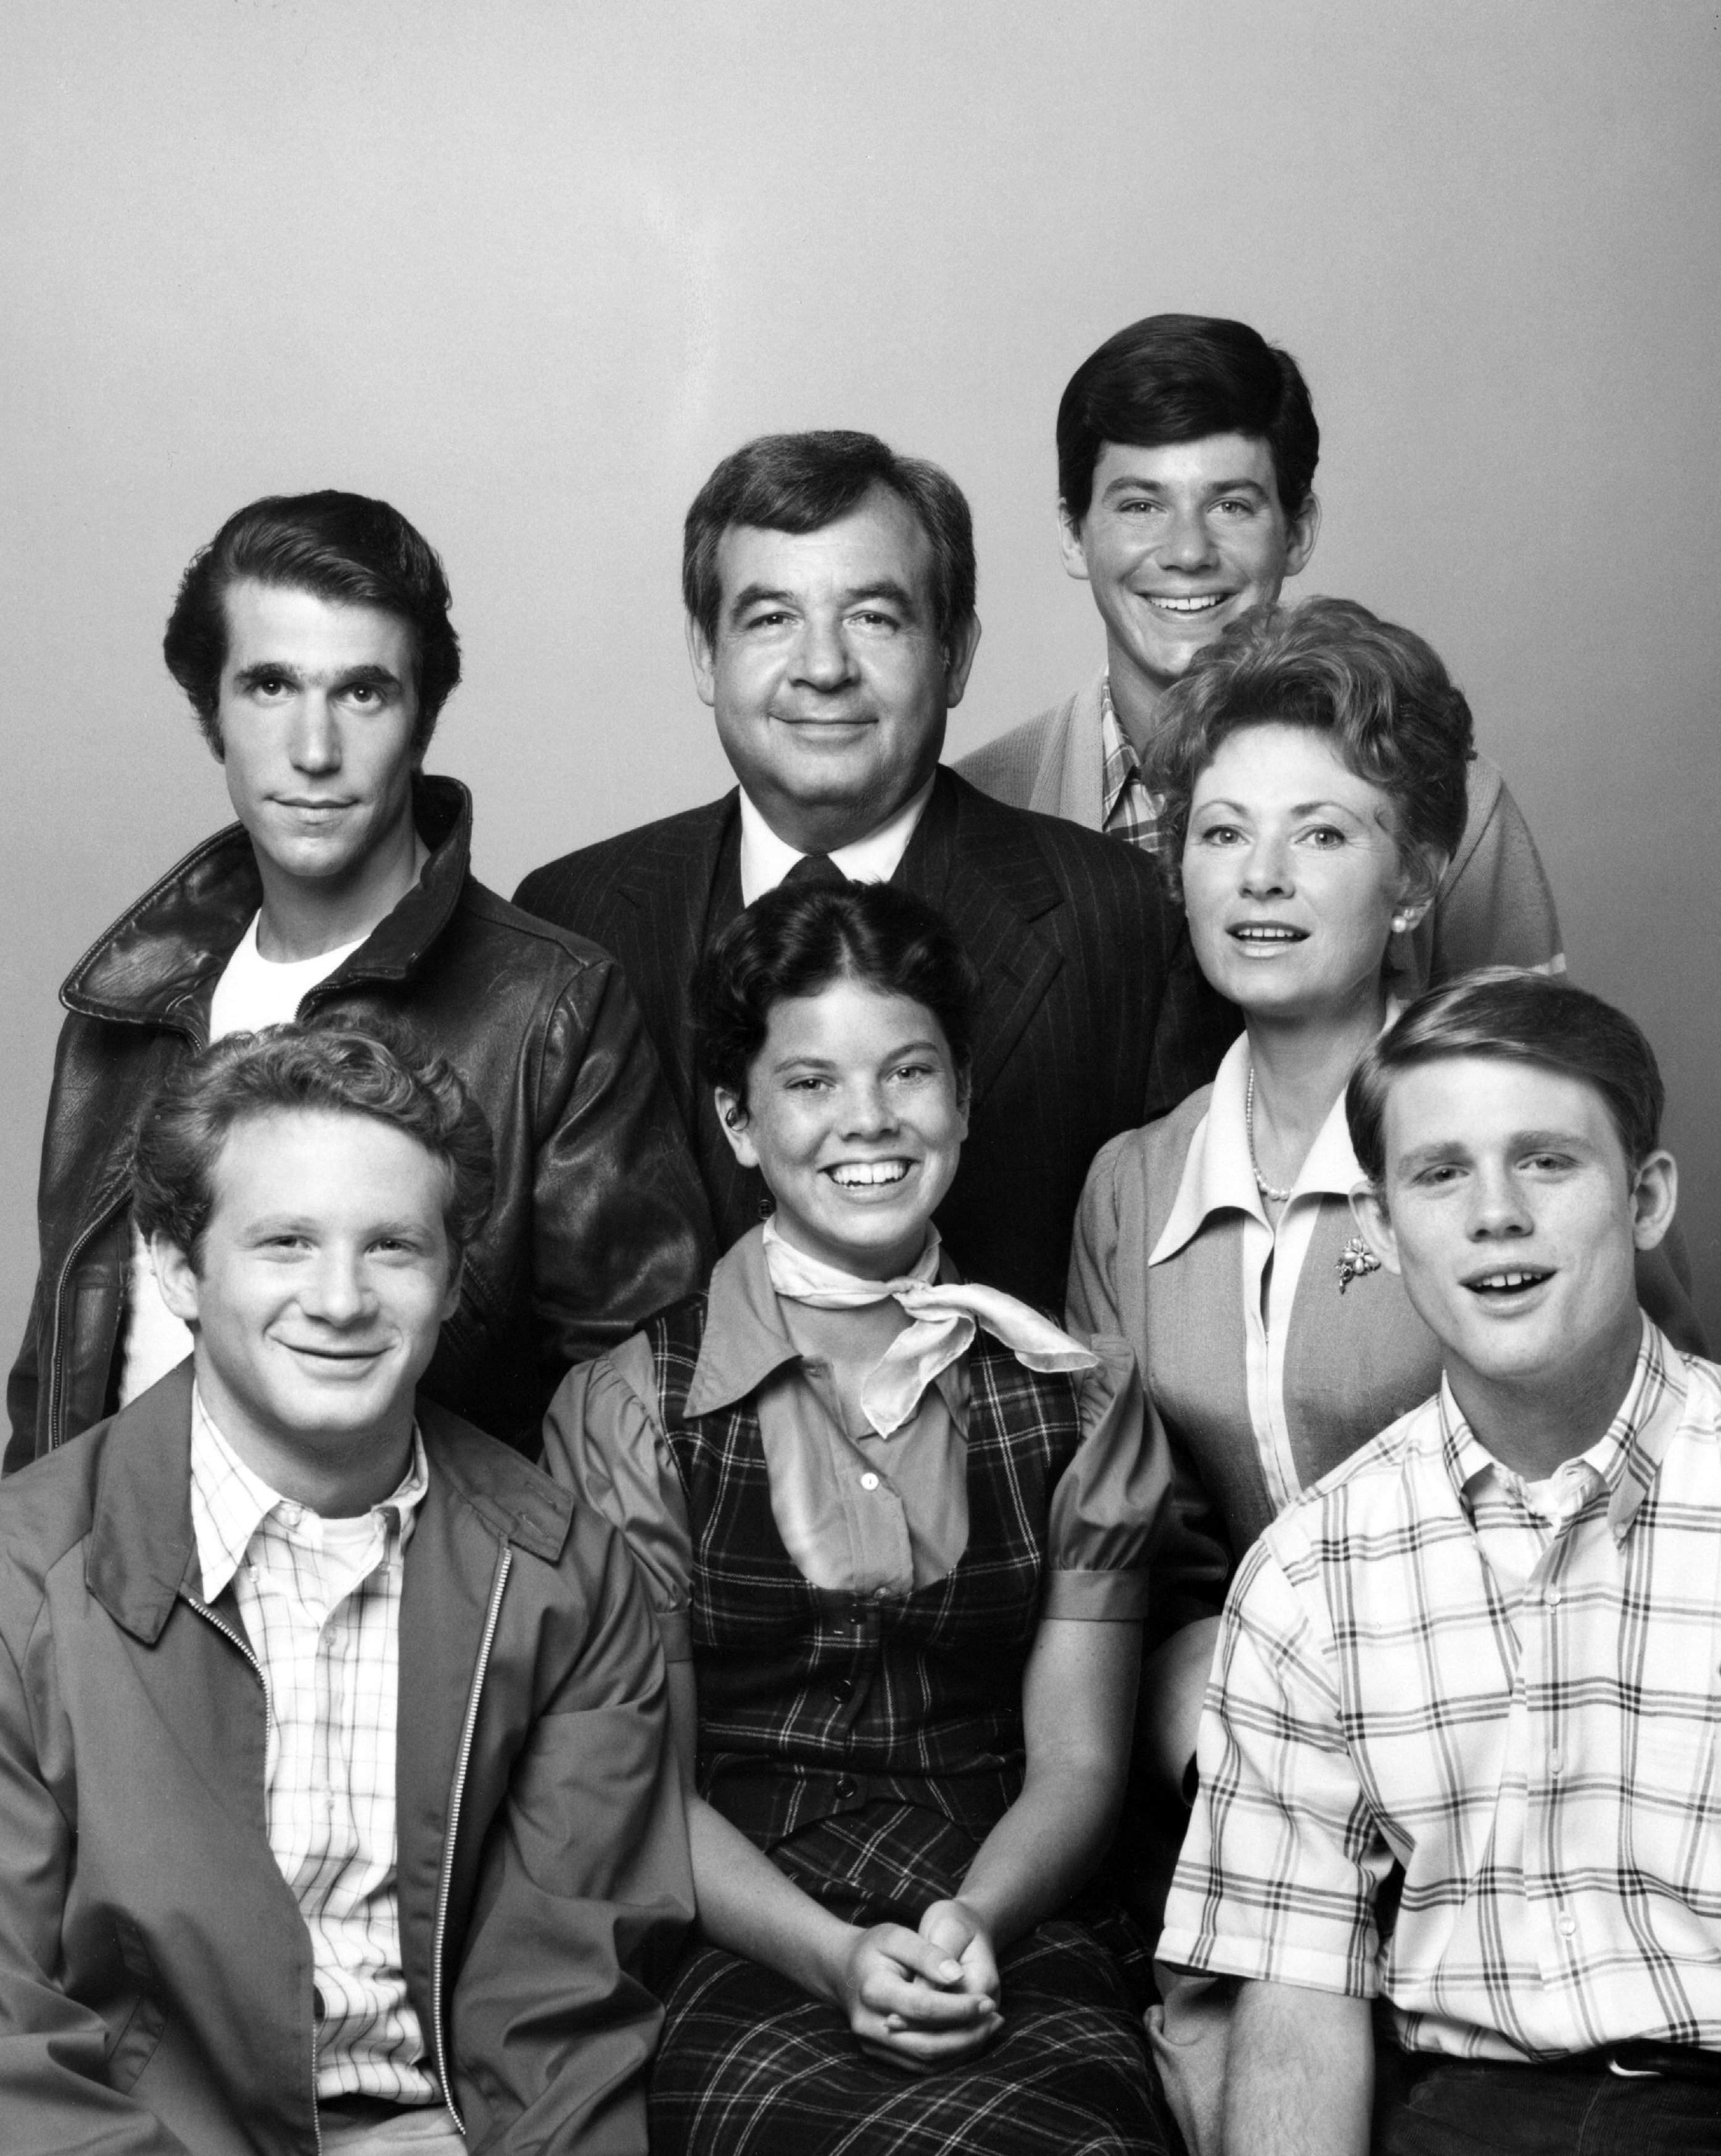 Marion Ross, Tom Bosley, Erin Moran, Ron Howard, Gavan O'Herlihy, Donny Most, Anson Williams, and Henry Winkler on "Happy Days" Season One , January 15, 1974 | Source: Getty Images 